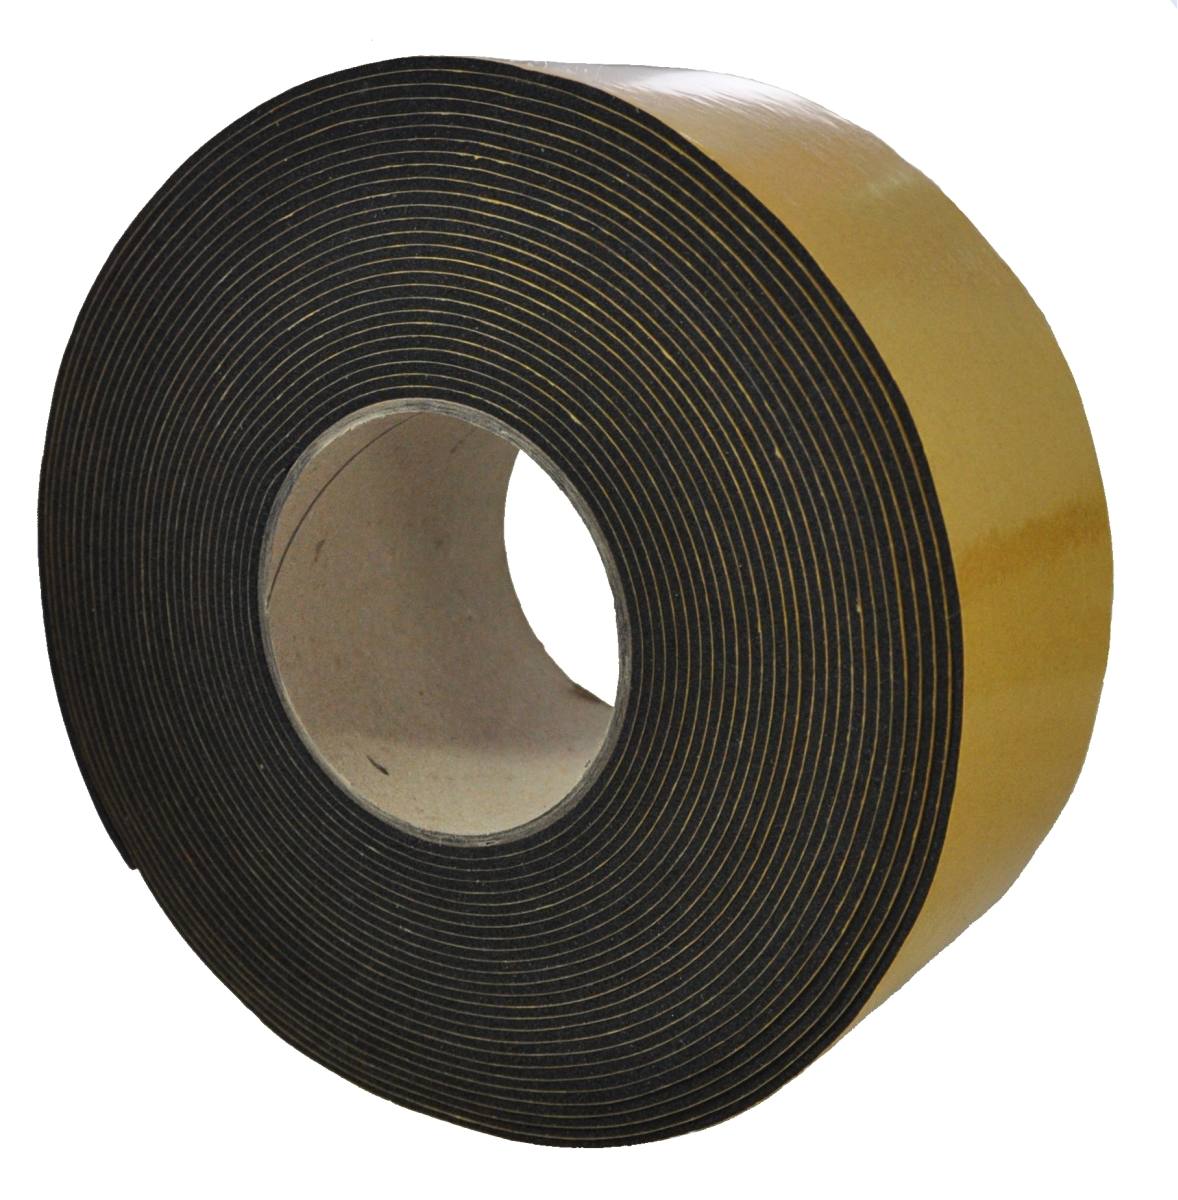 S-K-S EPDM 4mmx19mmx10m black self-adhesive on one side